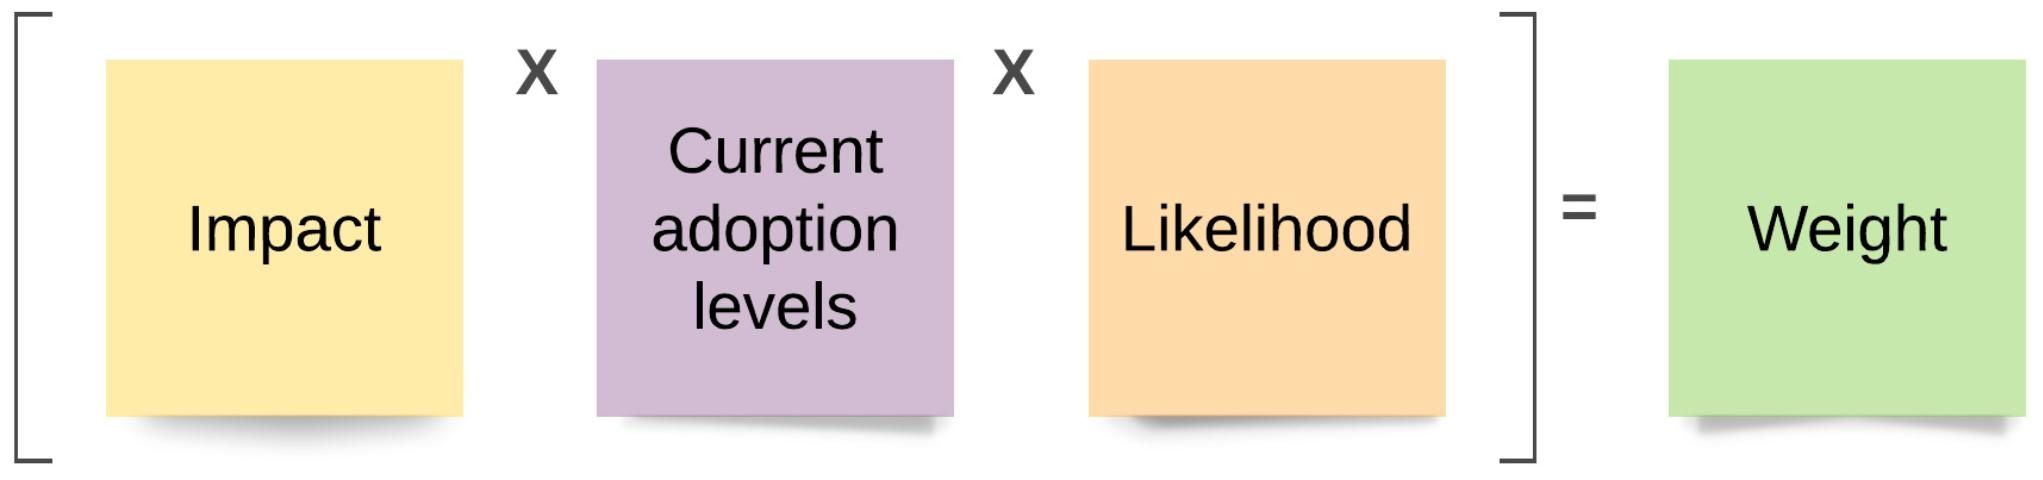 Figure 1. A social marketing approach to prioritizing potential behaviors for an intervention.